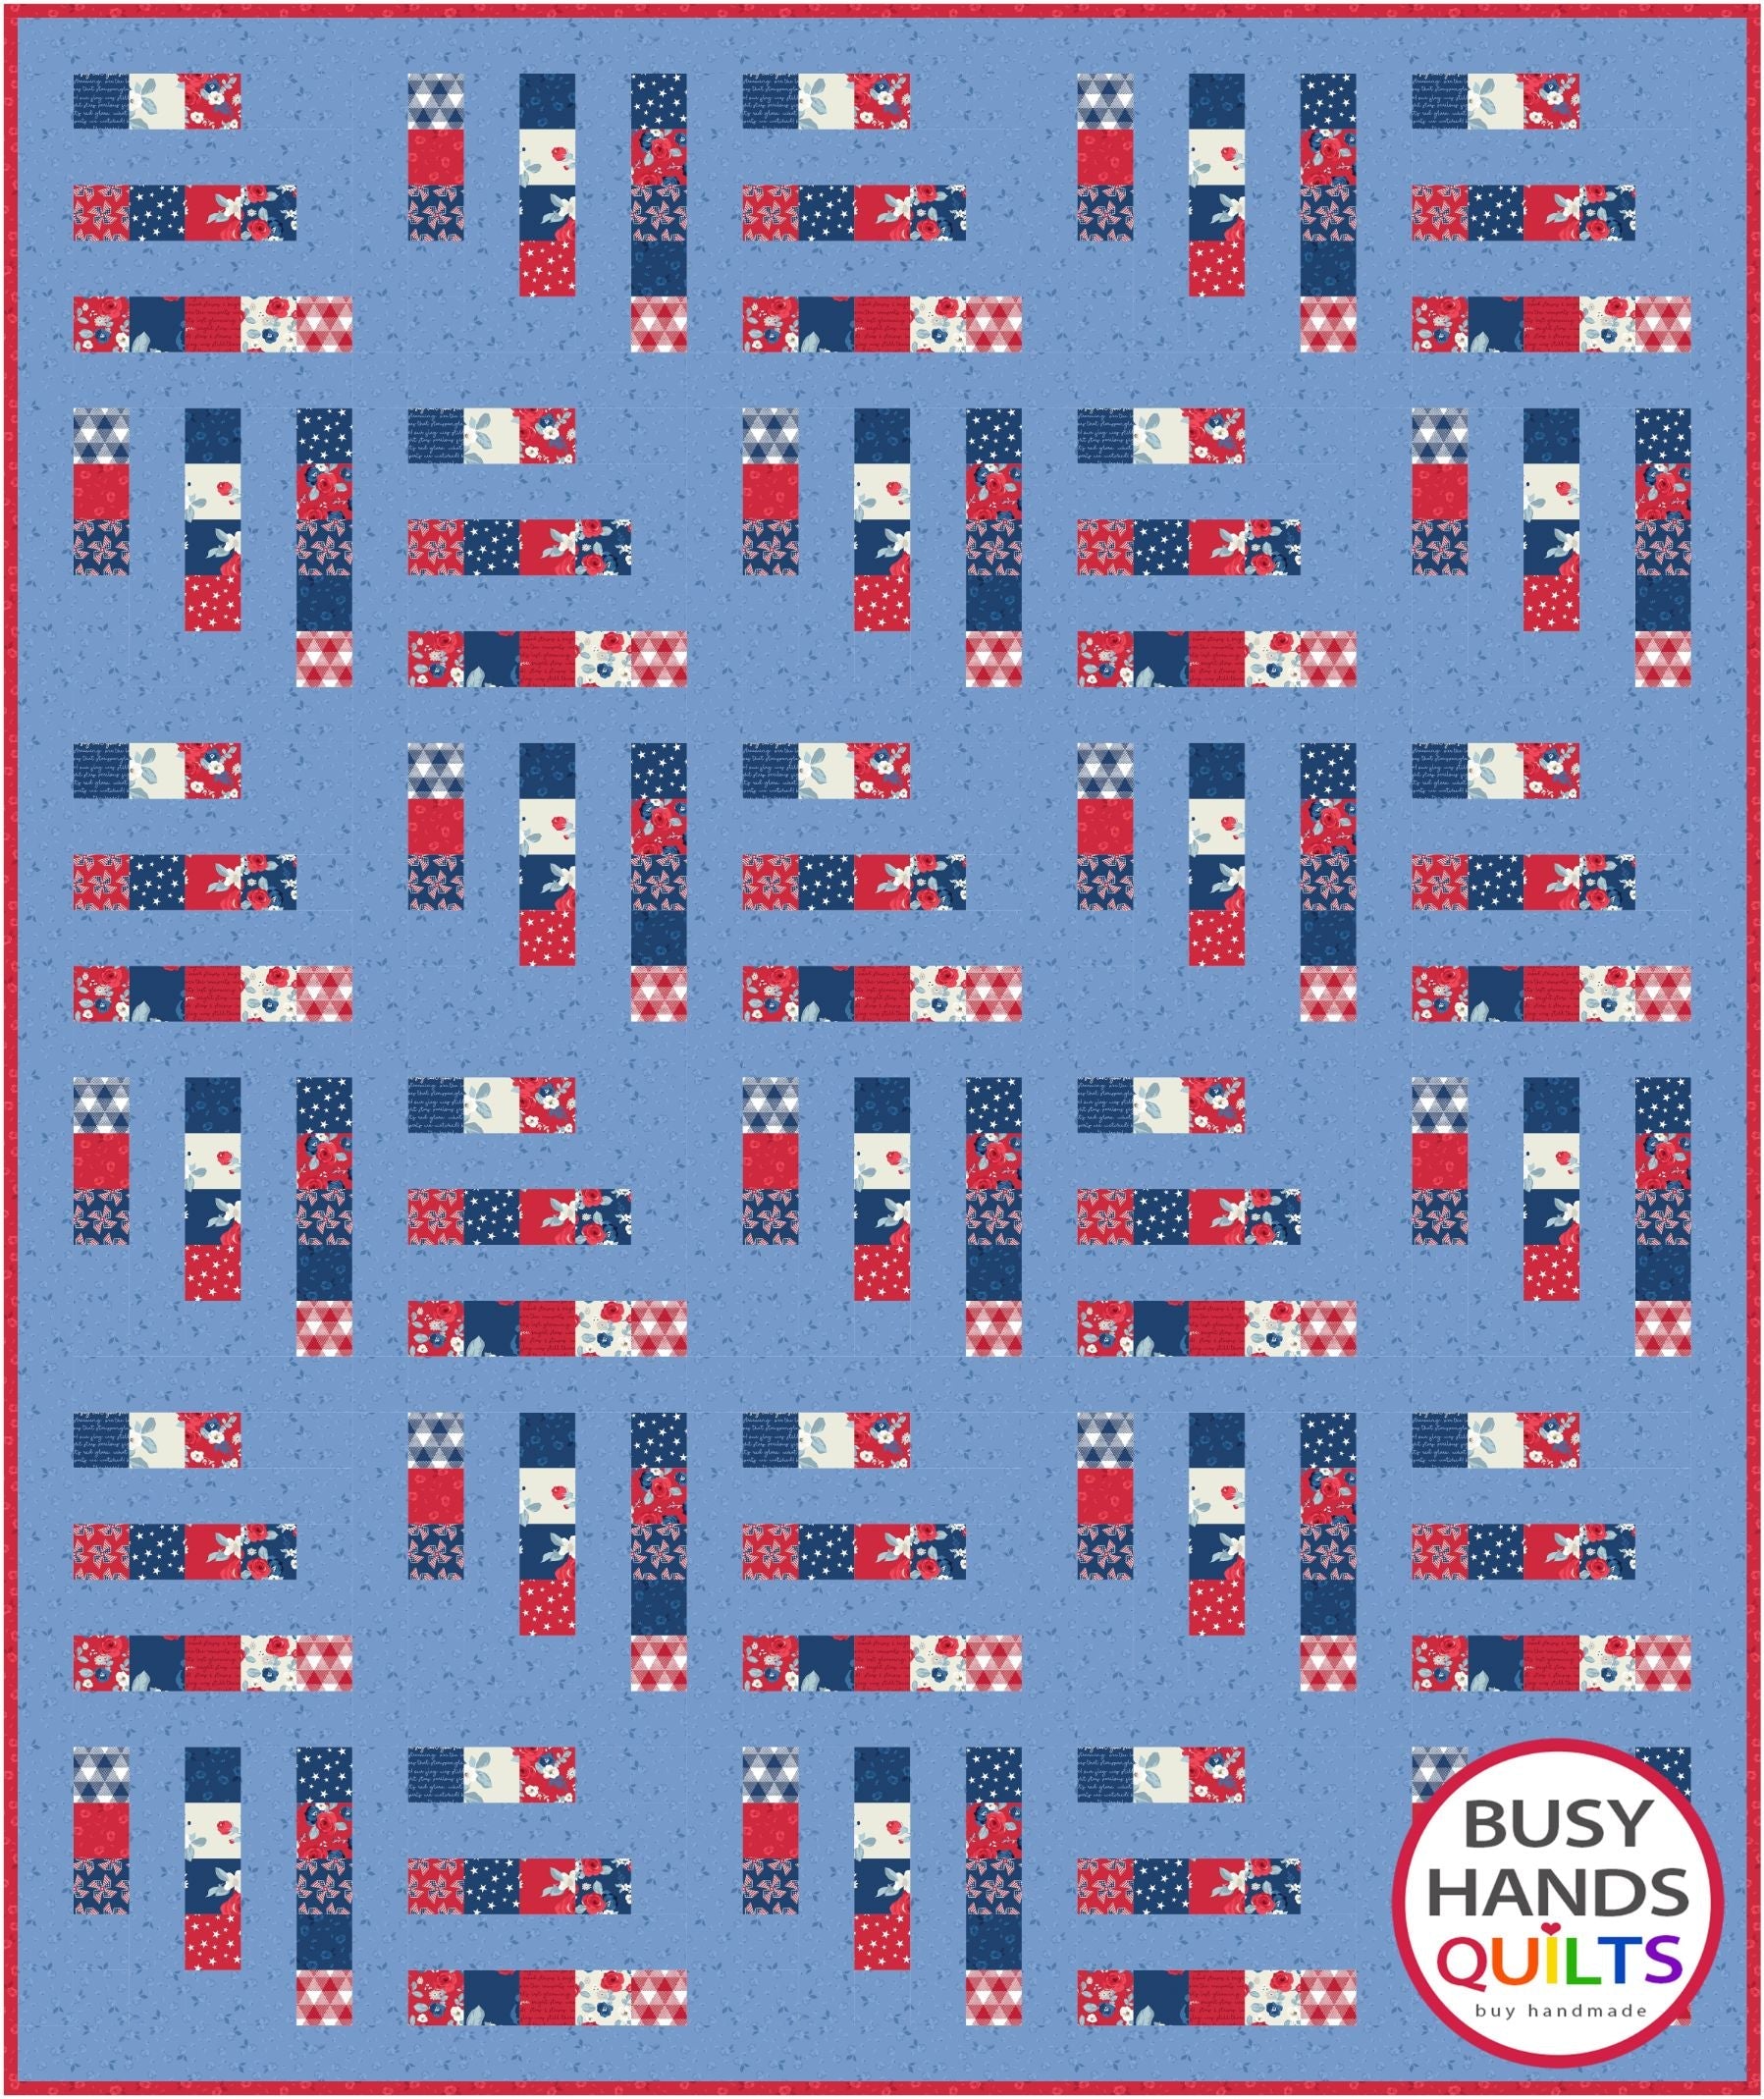 Good Morning Quilt Pattern PRINTED Busy Hands Quilts {$price}